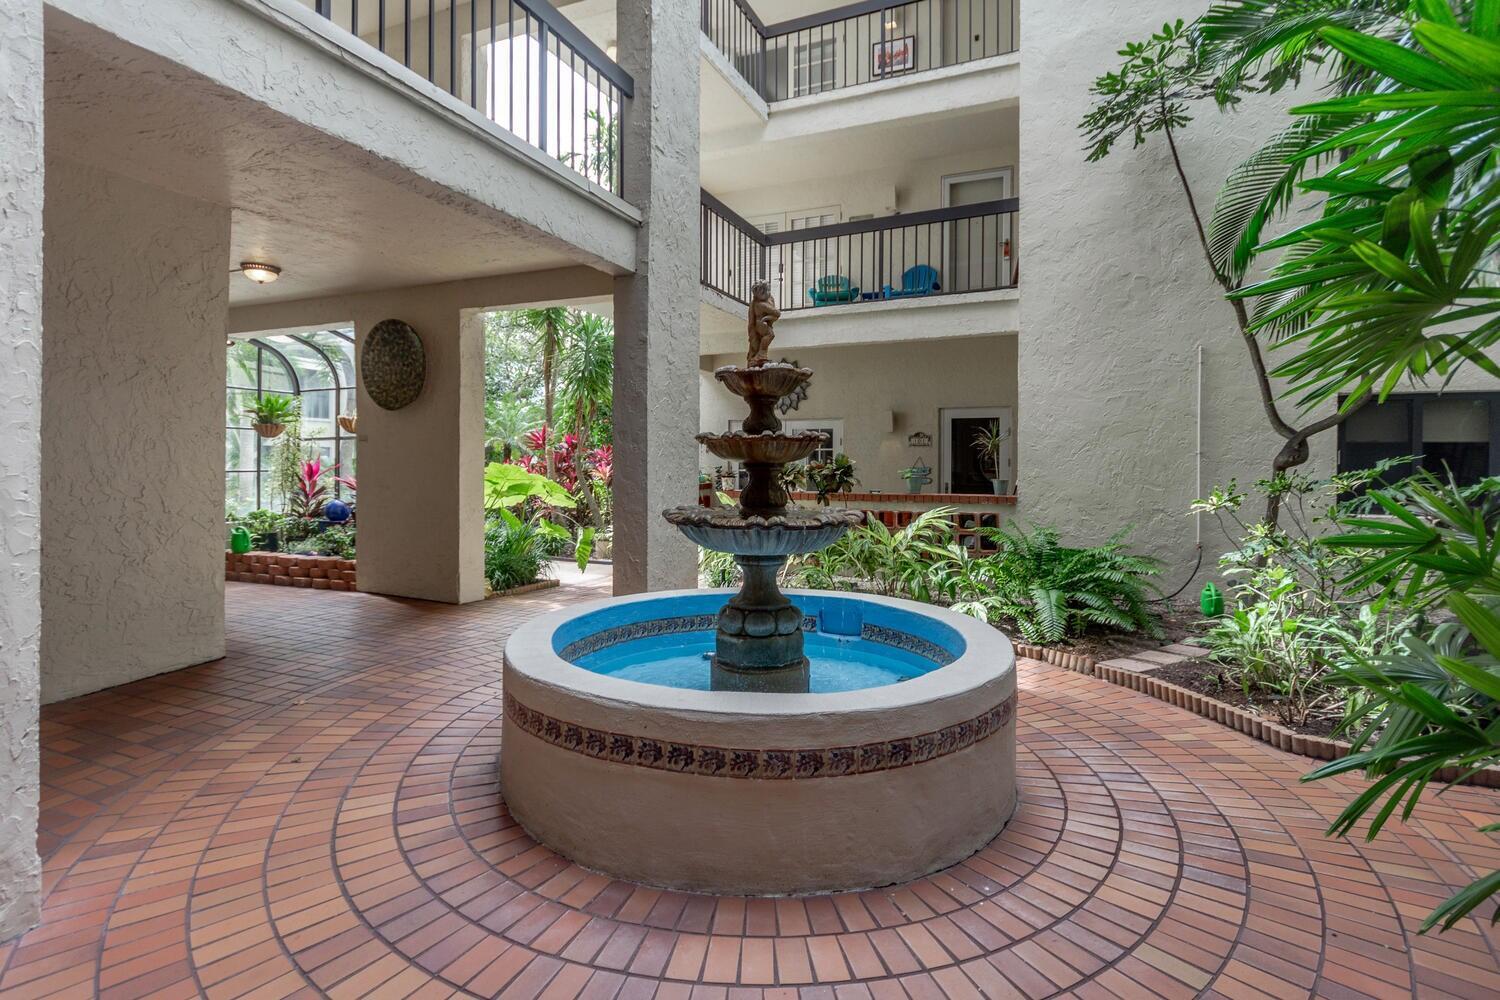 Come check out this ''Hidden Gem'' in Ocean Trail. Building 5 sits between the water to the west, and its own lake and Carlin Park to the south. Wide open interior walk-ways are open to a central fountain and verdant atrium reminiscent of classic  resort style hotel. This fully renovated corner unit has a bright proper foyer that leads to the open living concept - living room, kitchen and dining area. Both bedroom have large walk-in closets with tons  more storage throughout. Ocean views can be seen from main living area and master bedroom. Primary exposure is south-east with sun all day. There is a 5' x 4' storage unit included and Rock Star parking.